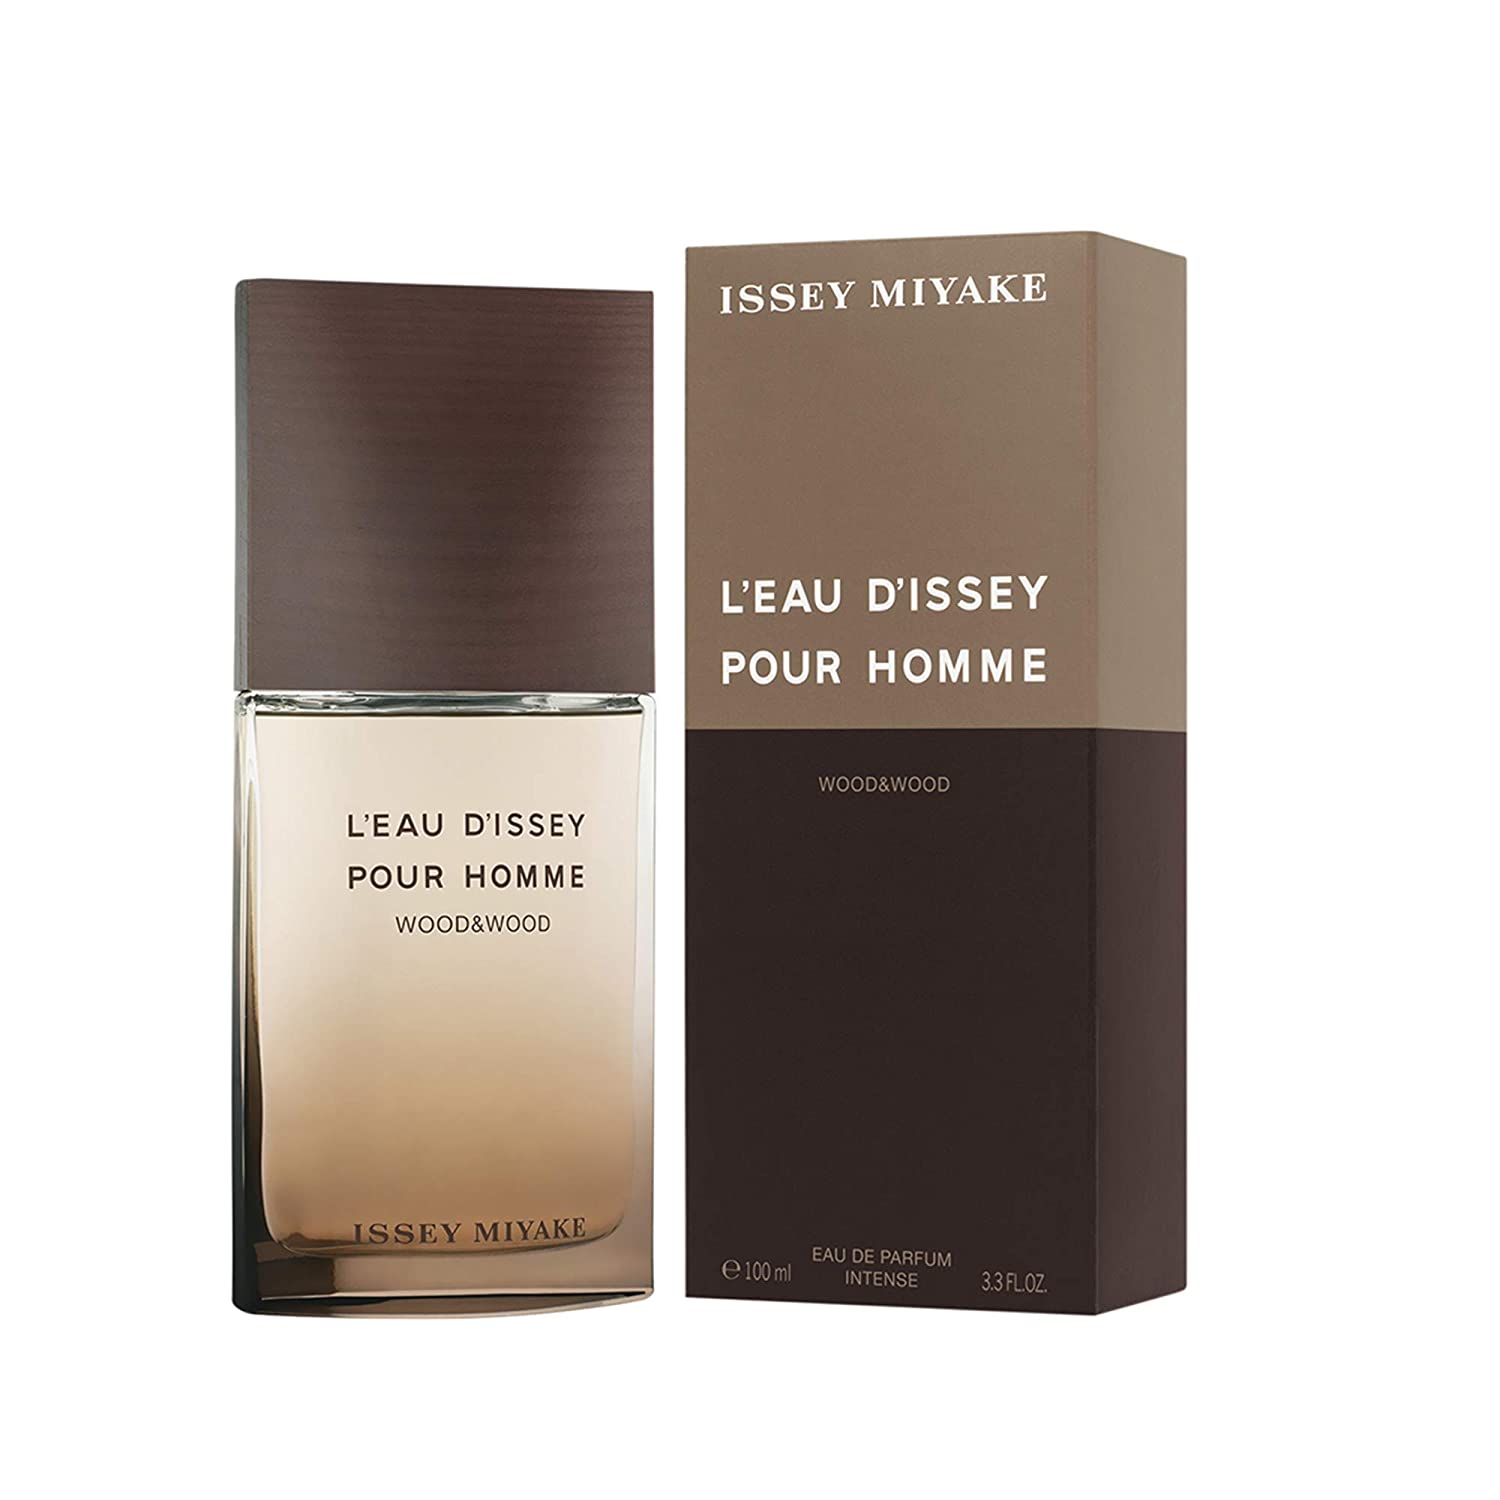 Issey Miyake L'eau D'issey Pour Homme Wood & Wood EDP Intense 3.3